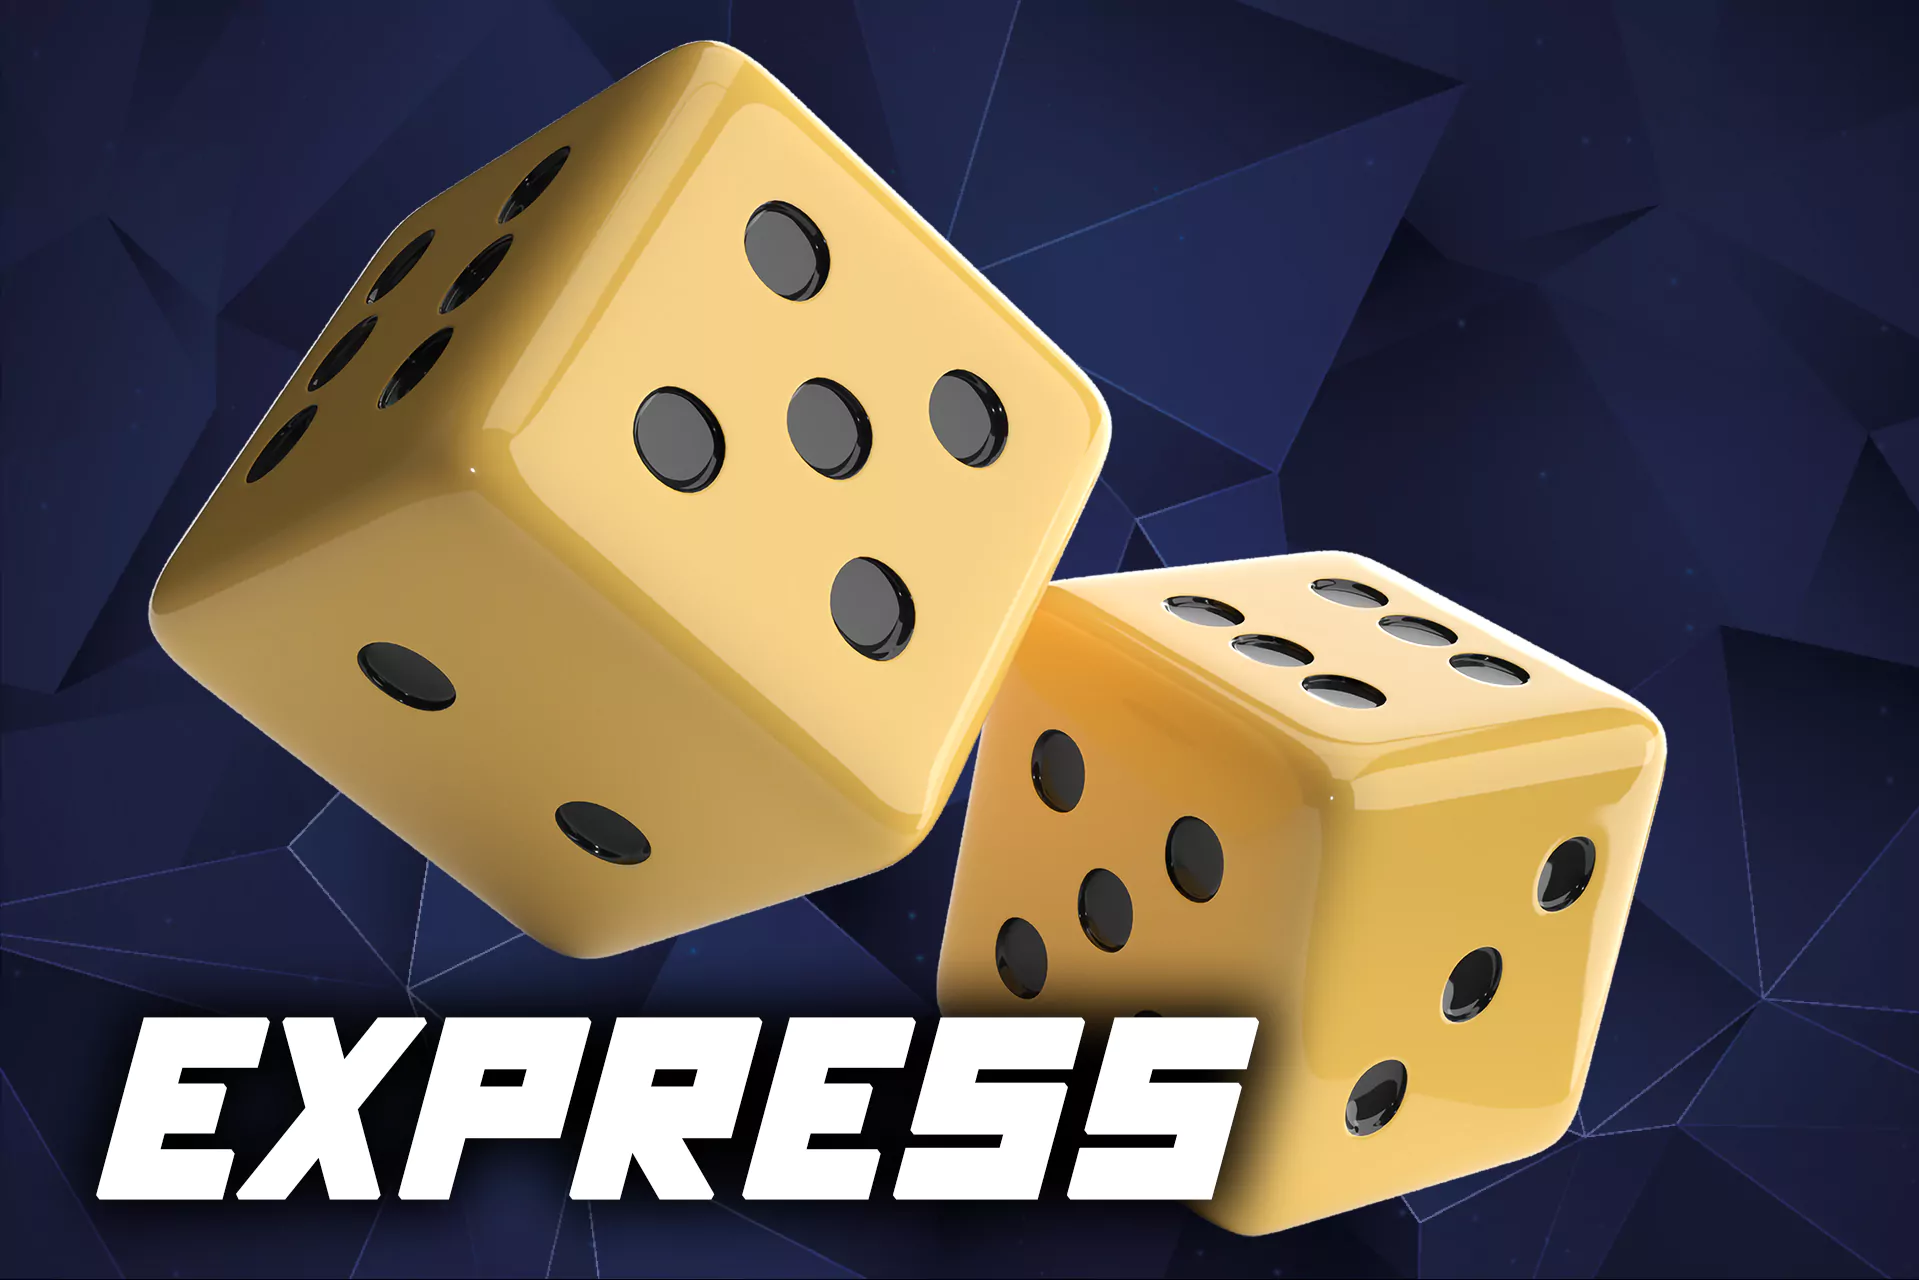 Place express bets on sports matches at ICCWIN.